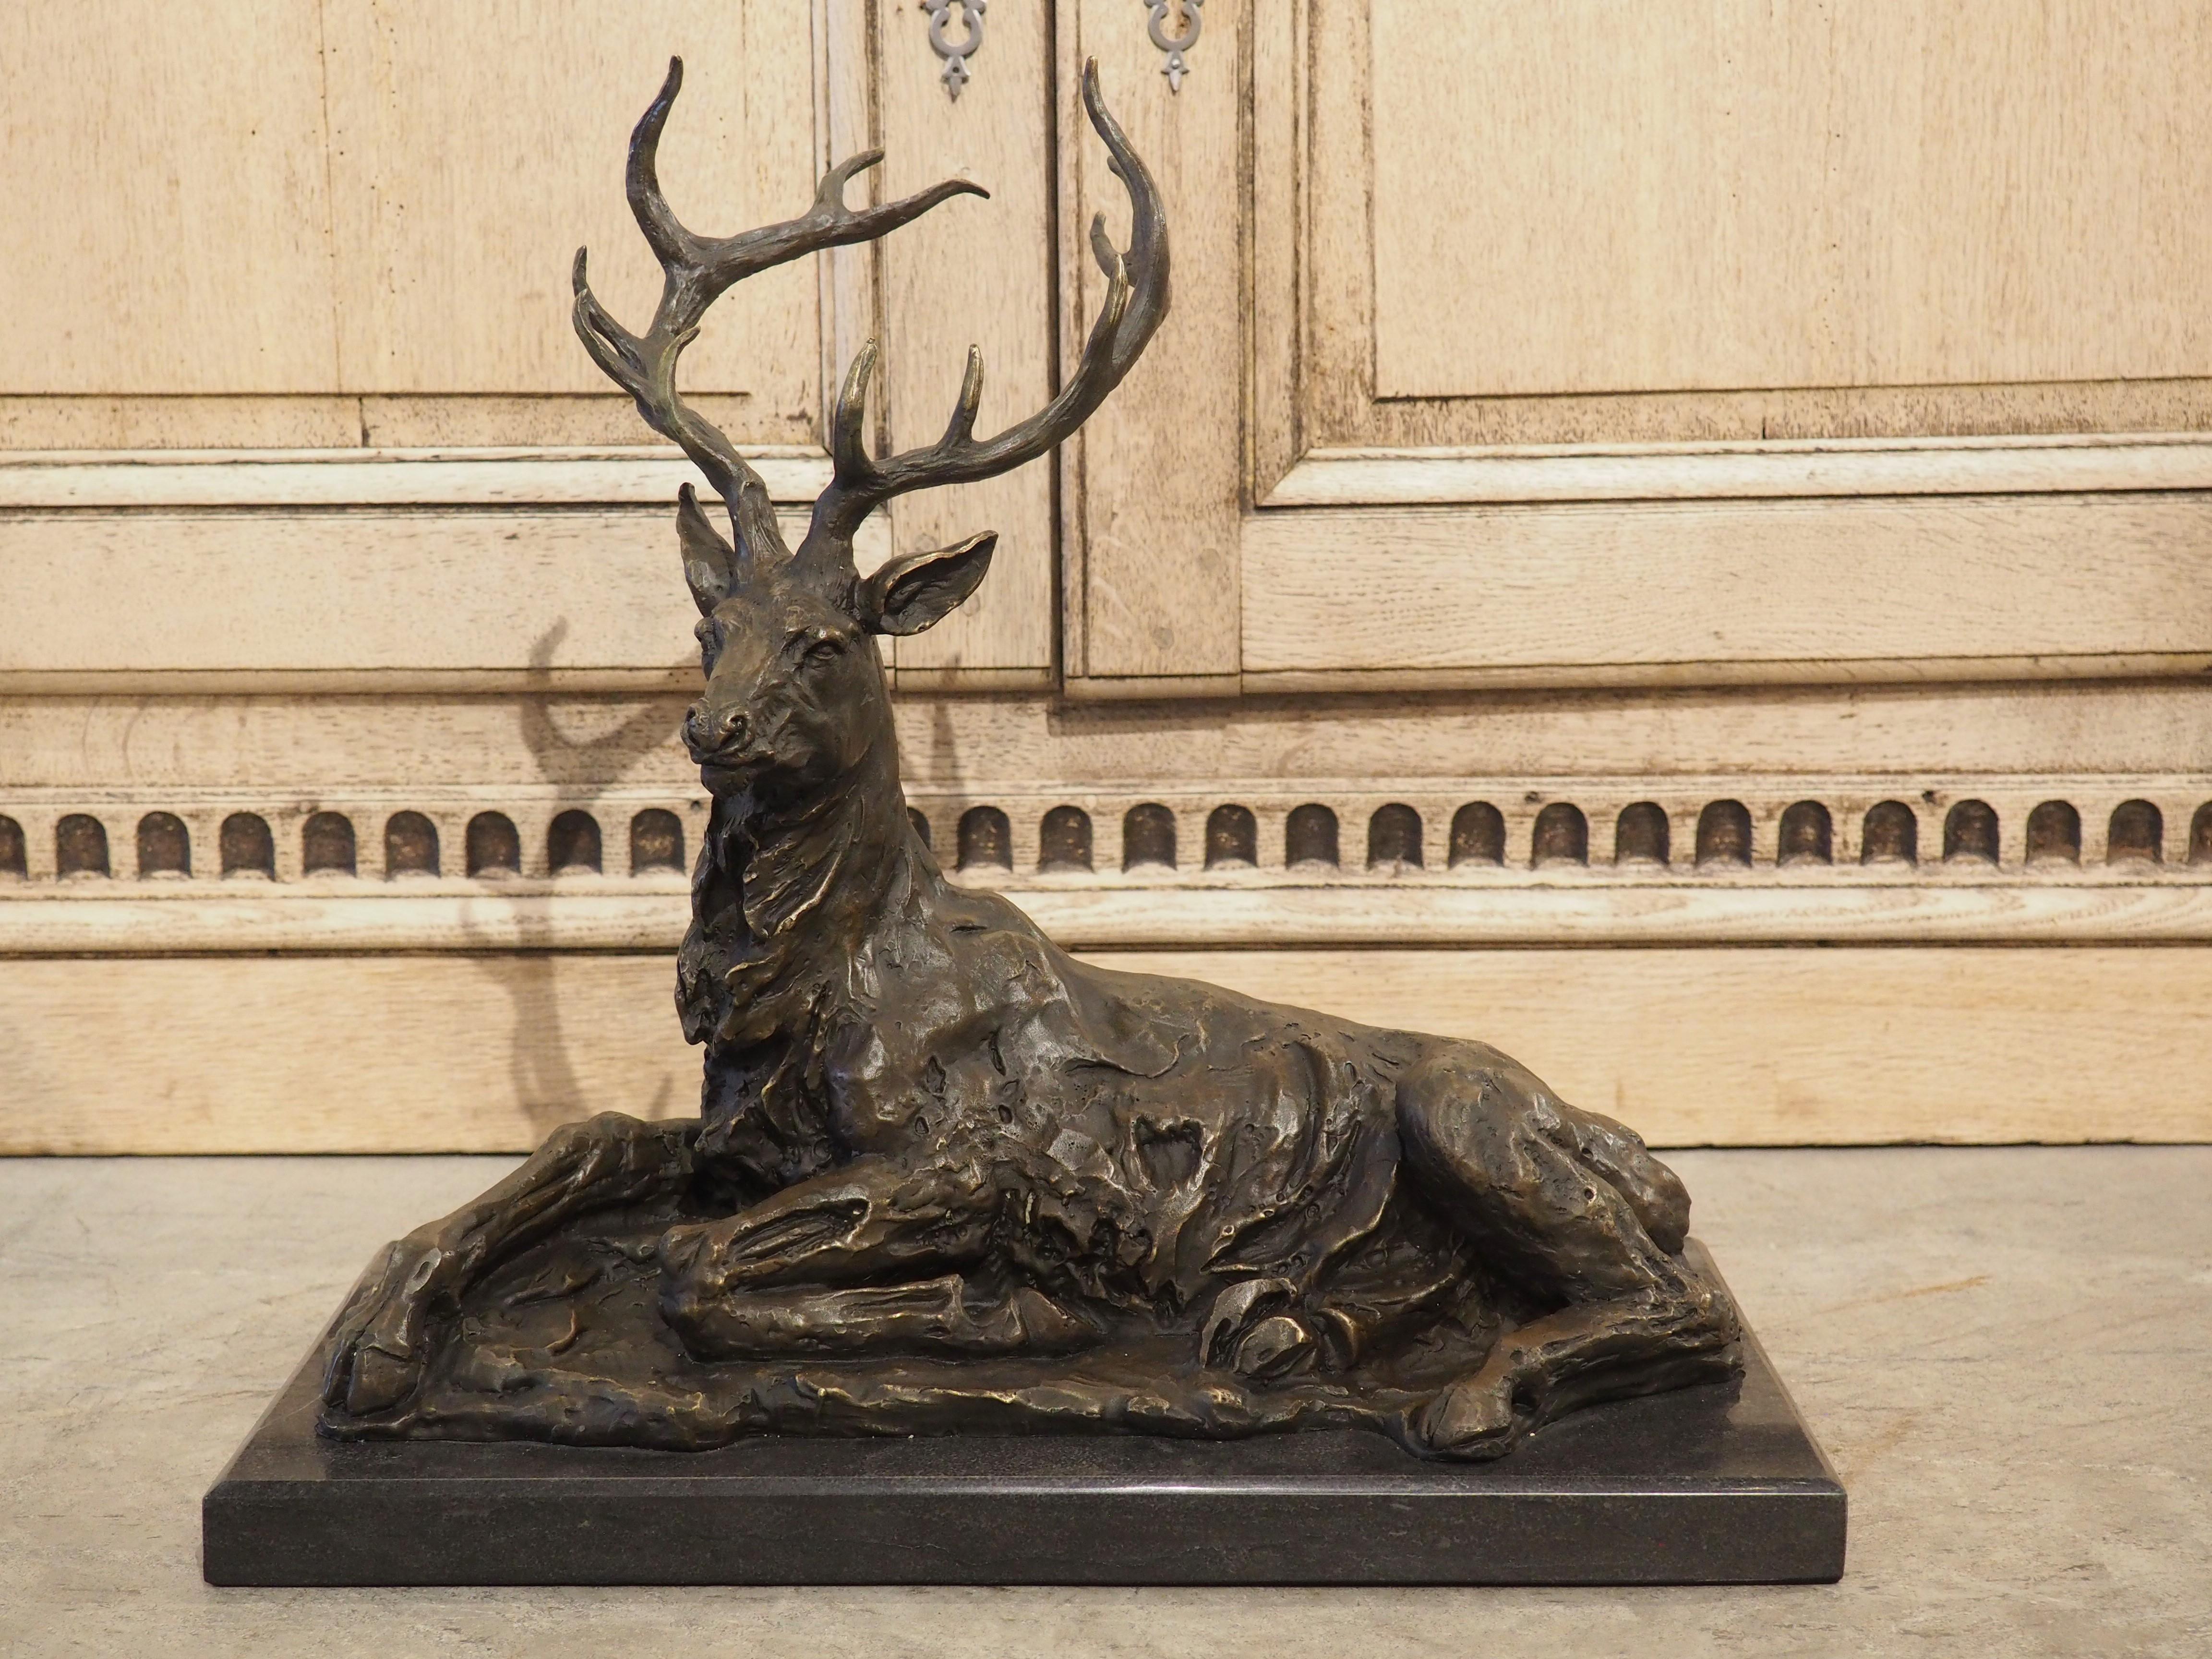 Lost-wax casting is a metalwork technique where a mold is used to produce a finished sculpture. The process has been used for millennia to create art, with the original method using wax molds, hence the name. Our patinated bronze stag sculpture on